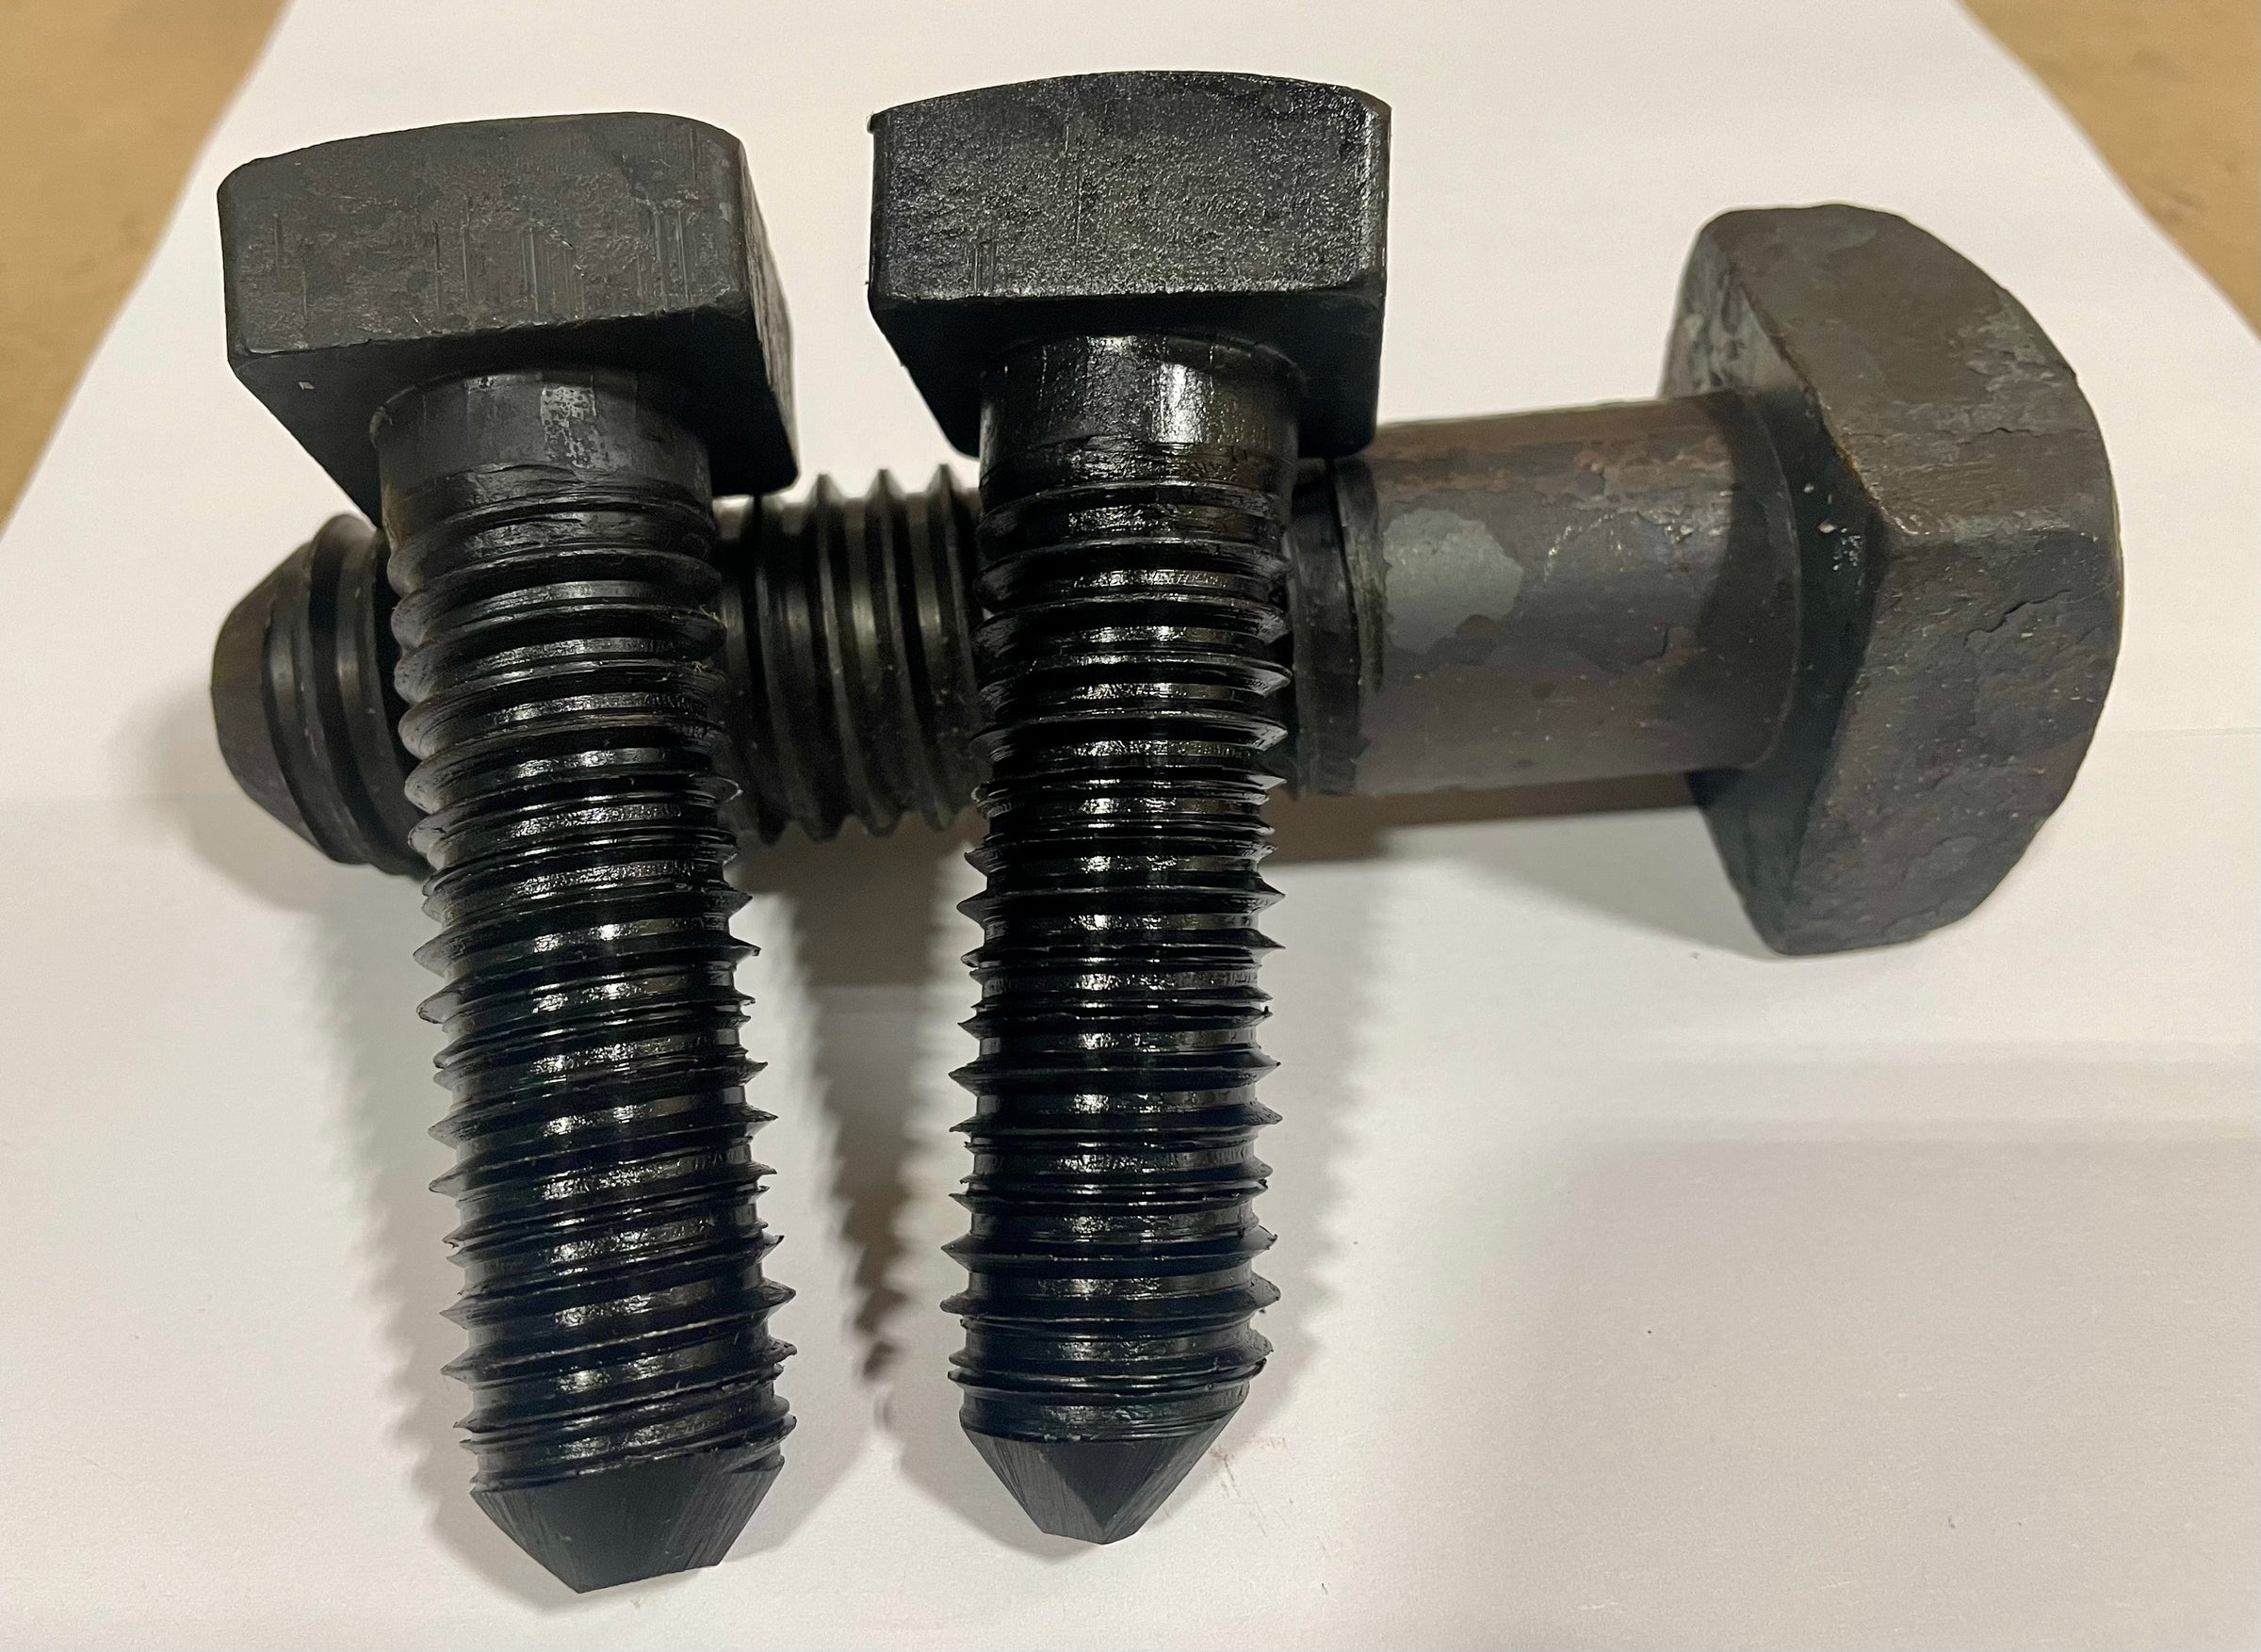 7/8" & Larger Square Head Lag Bolts